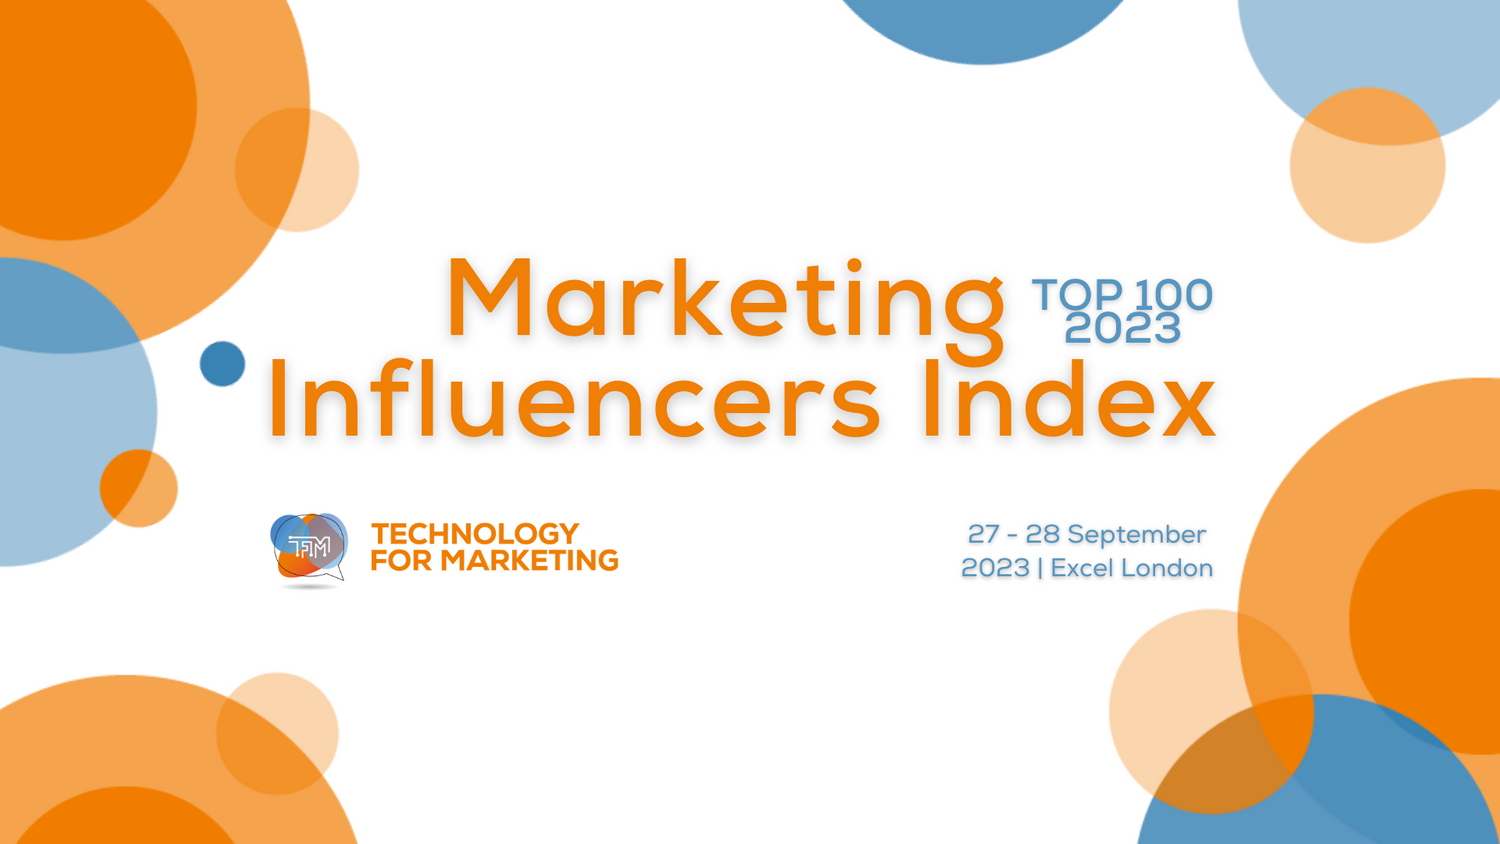 Launching the Marketing Influencers Top 100 Index